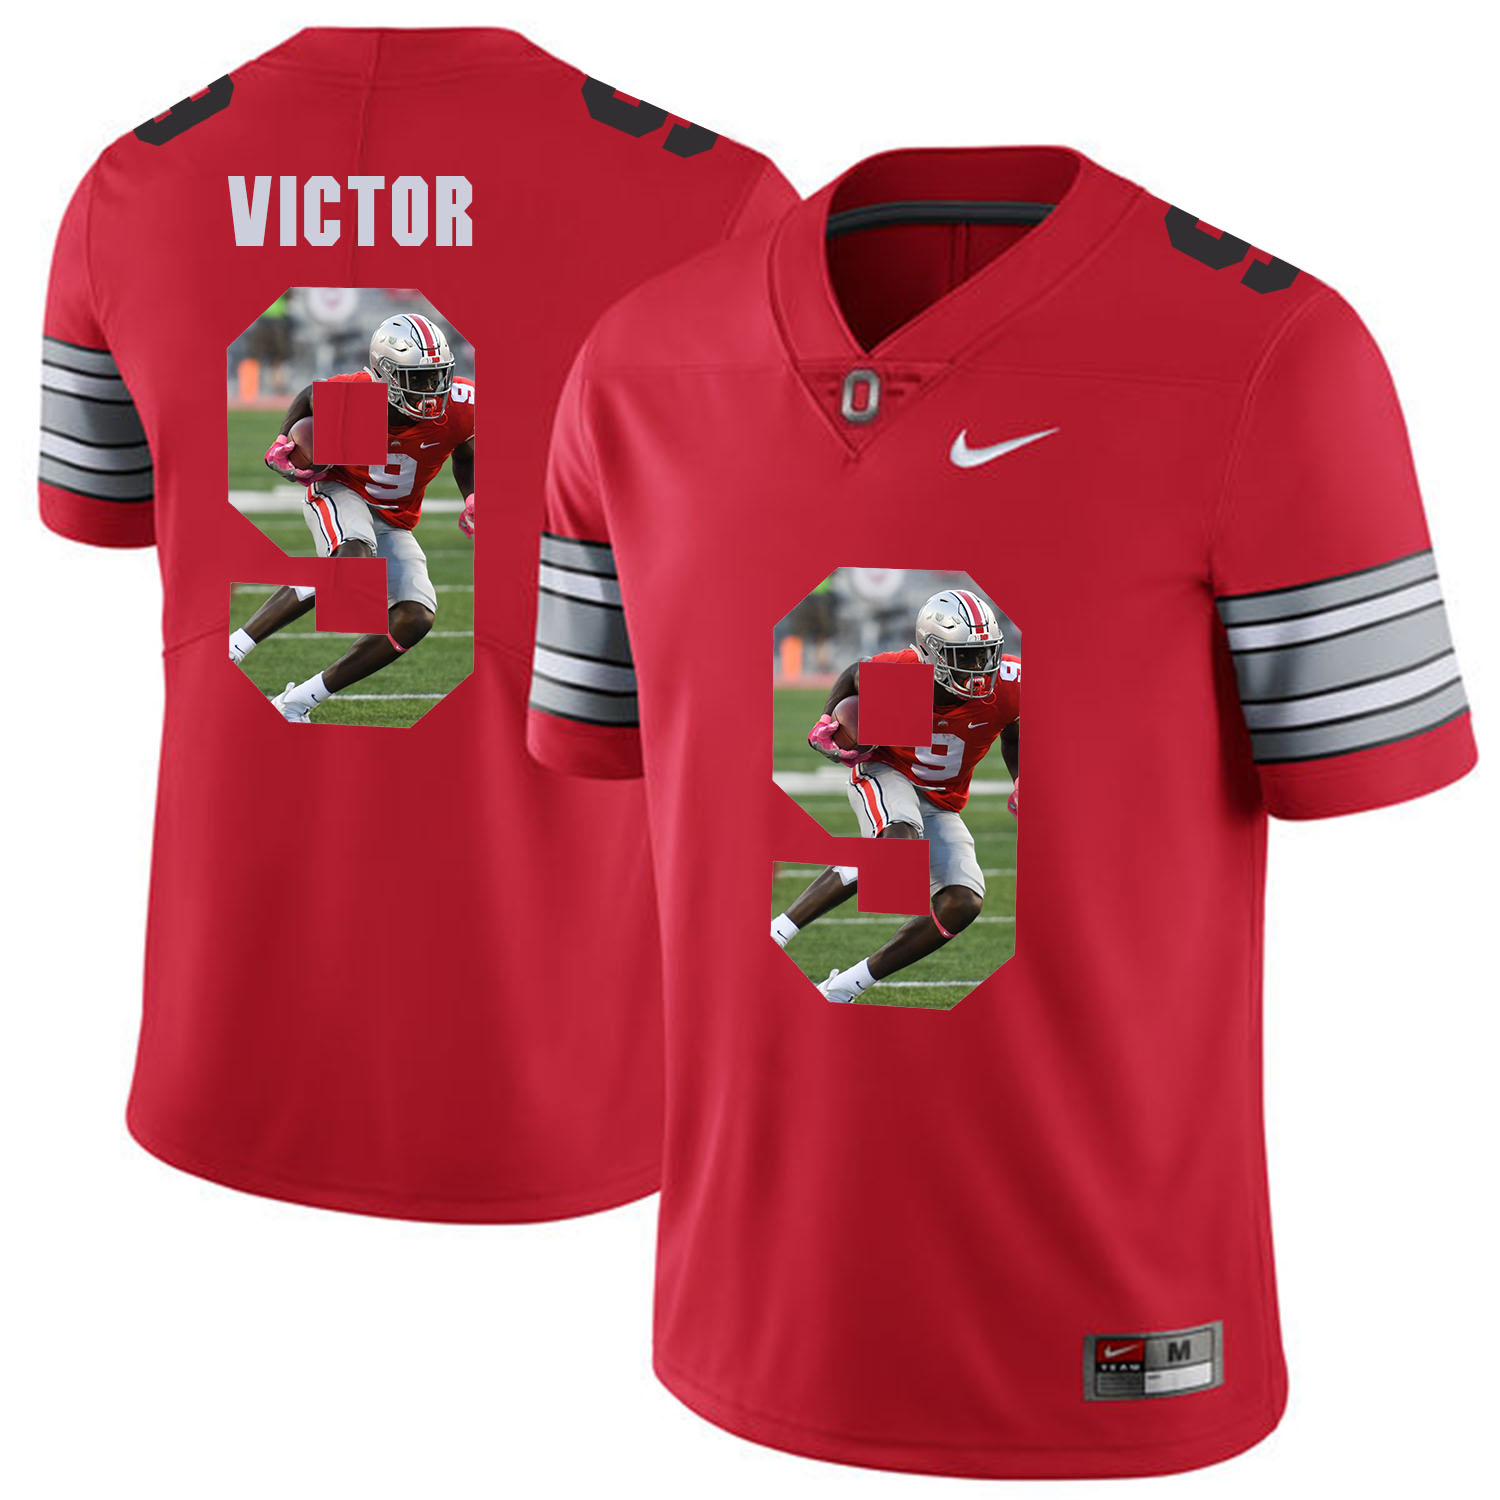 Men Ohio State 9 Victor Red Fashion Edition Customized NCAA Jerseys